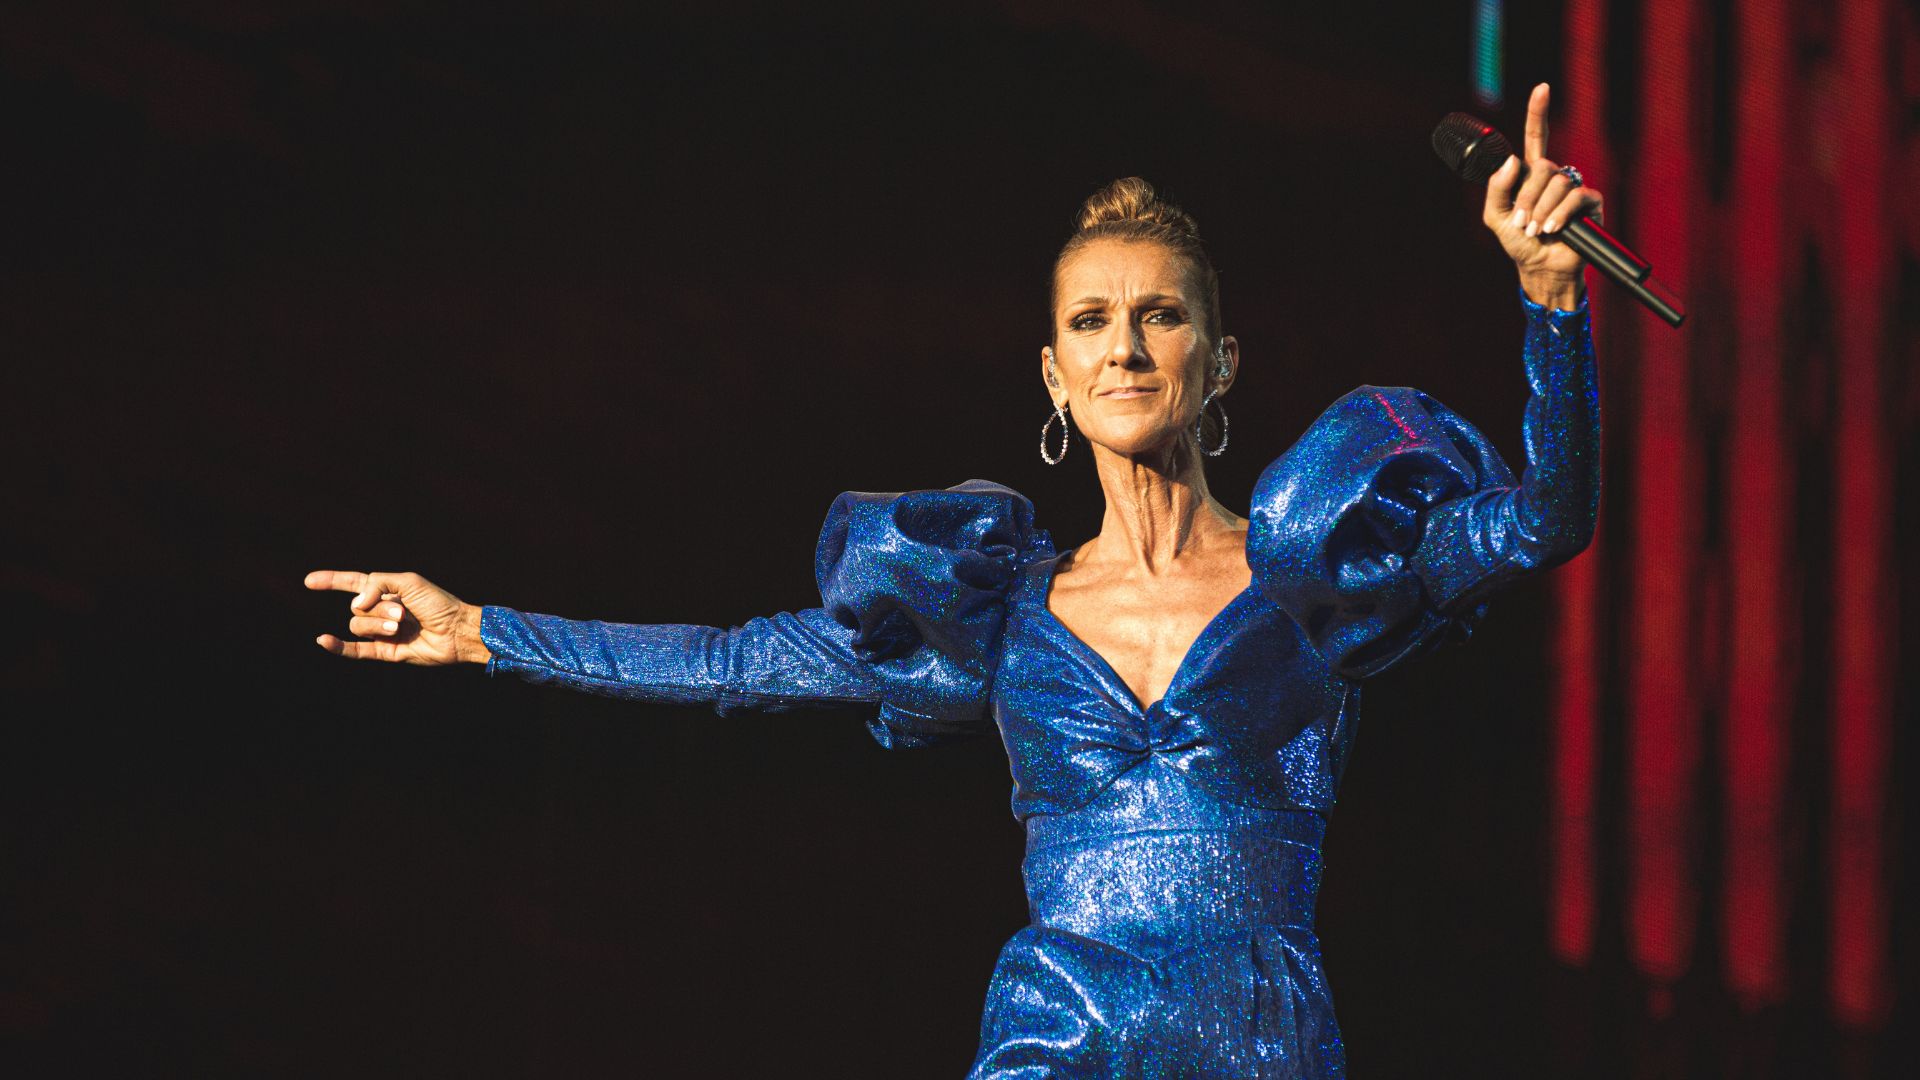 Celine Dion cancels Courage World Tour amid ongoing health struggles ...